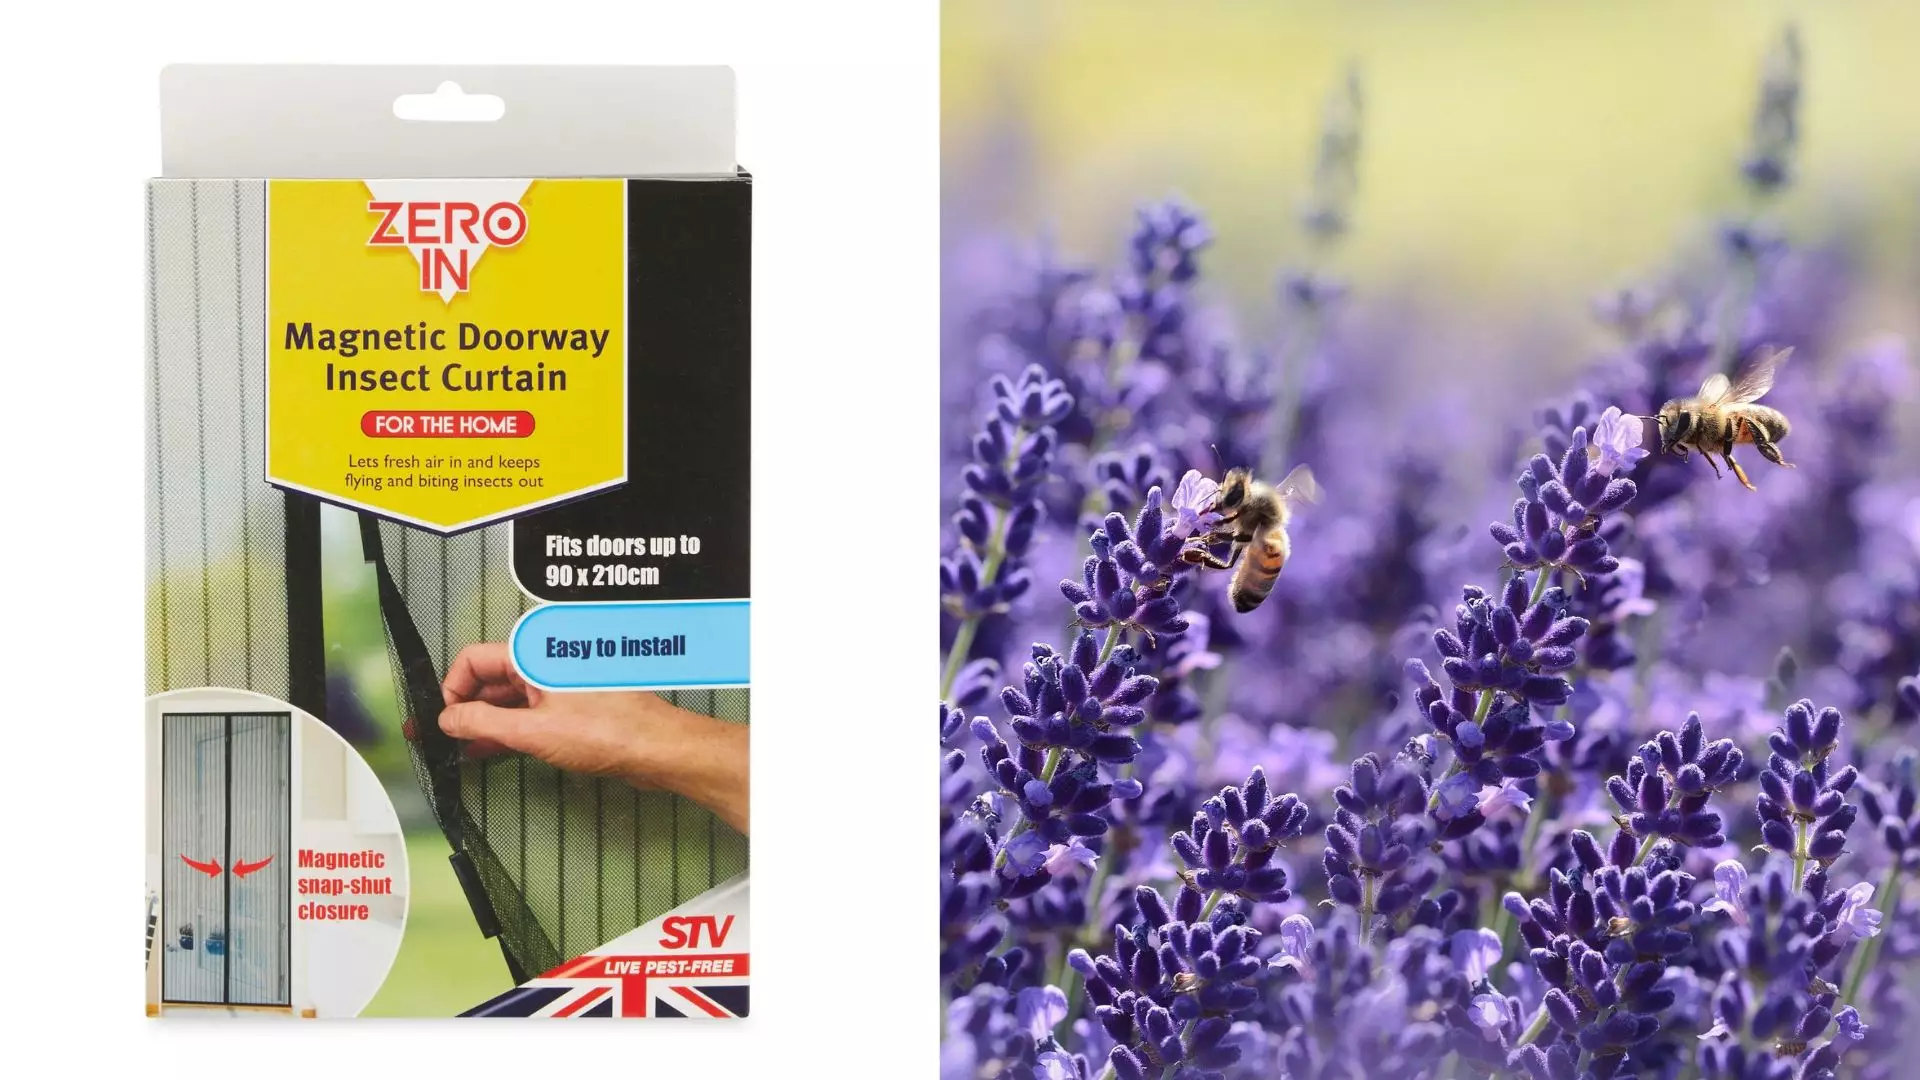 This £3.99 Magnetic Door Screen From Aldi Will Keep Insects Out Of Your Home This Summer